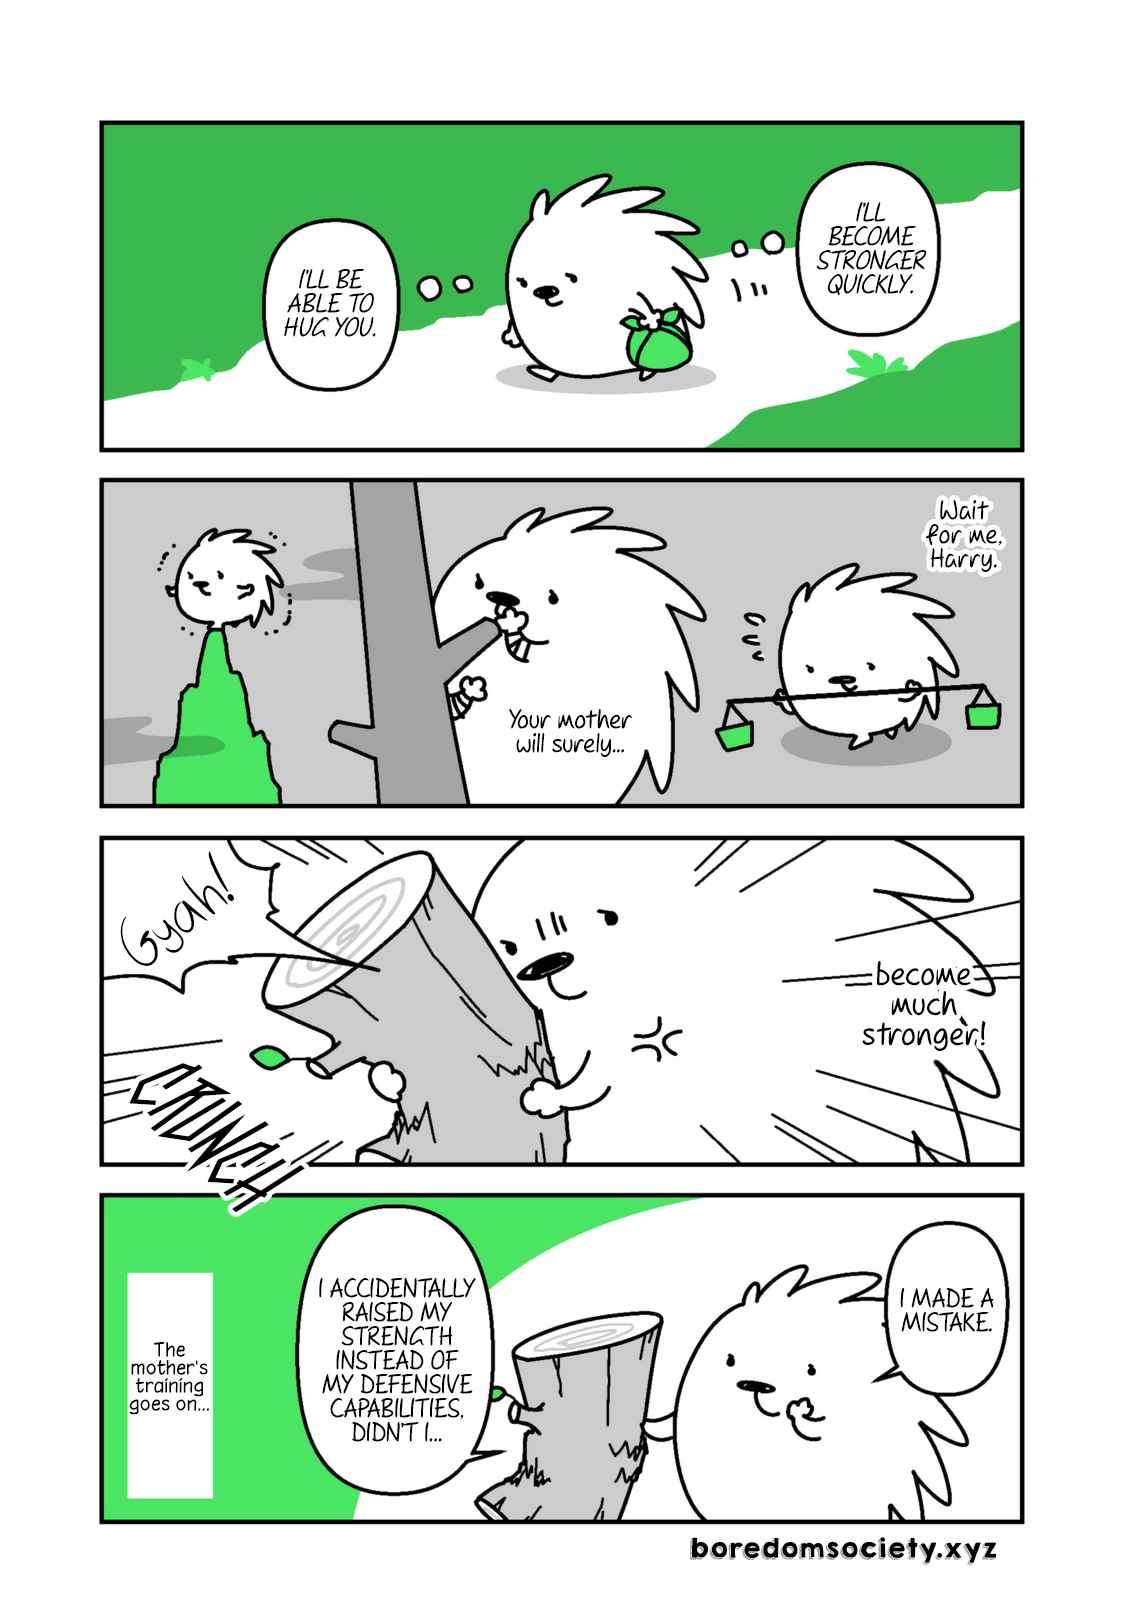 Hedgehog Harry Vol. 1 Ch. 107.5 Mother, A Journey Of Training